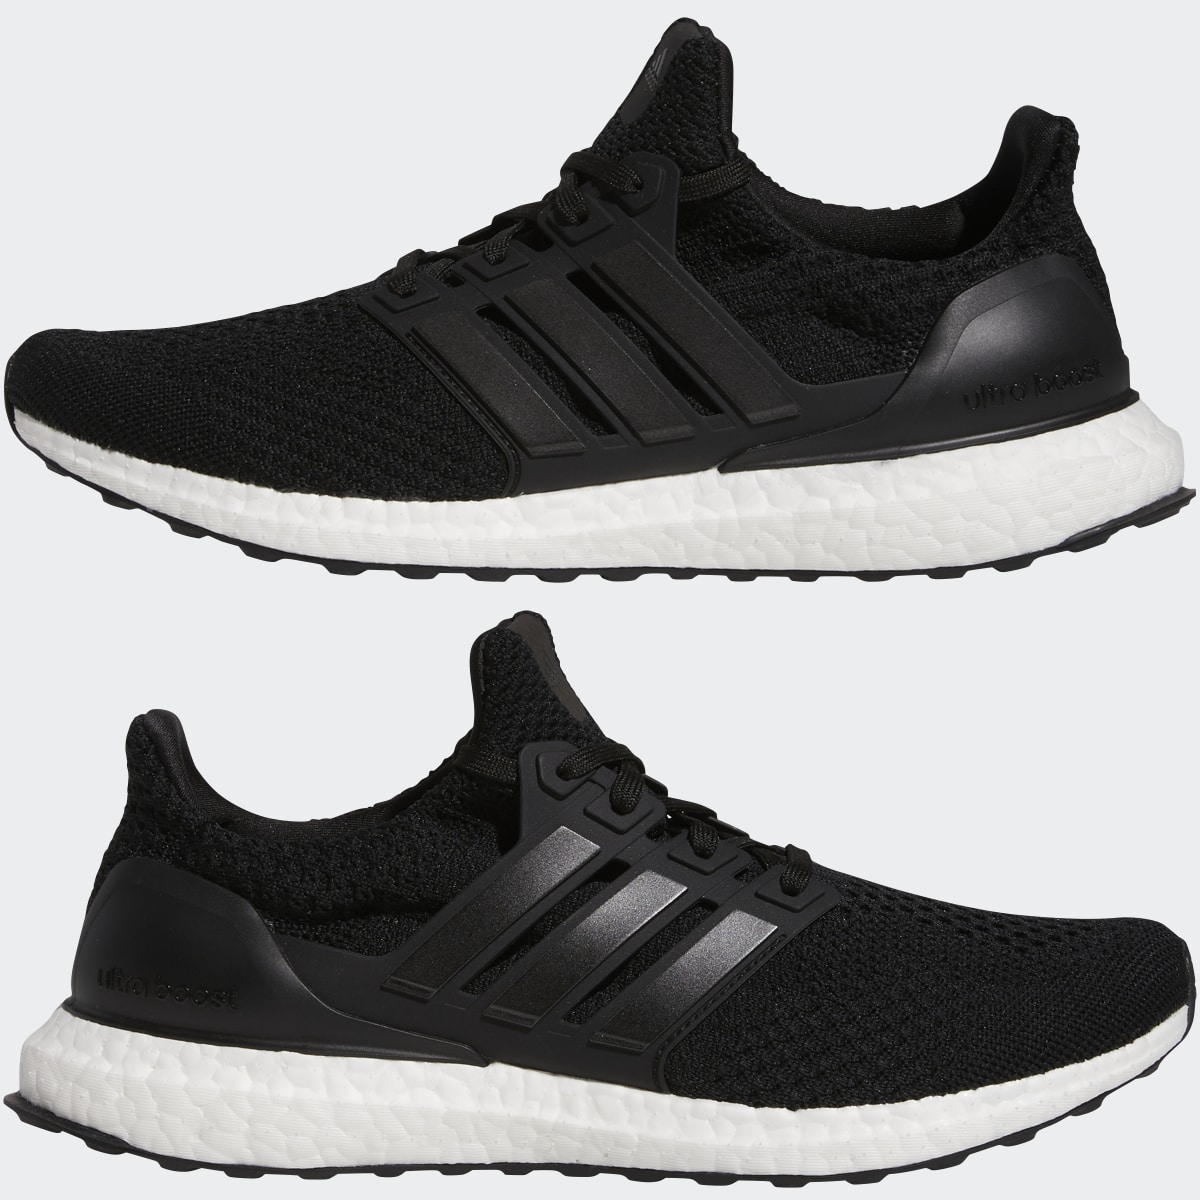 Adidas Ultraboost 5.0 DNA Shoes. 11